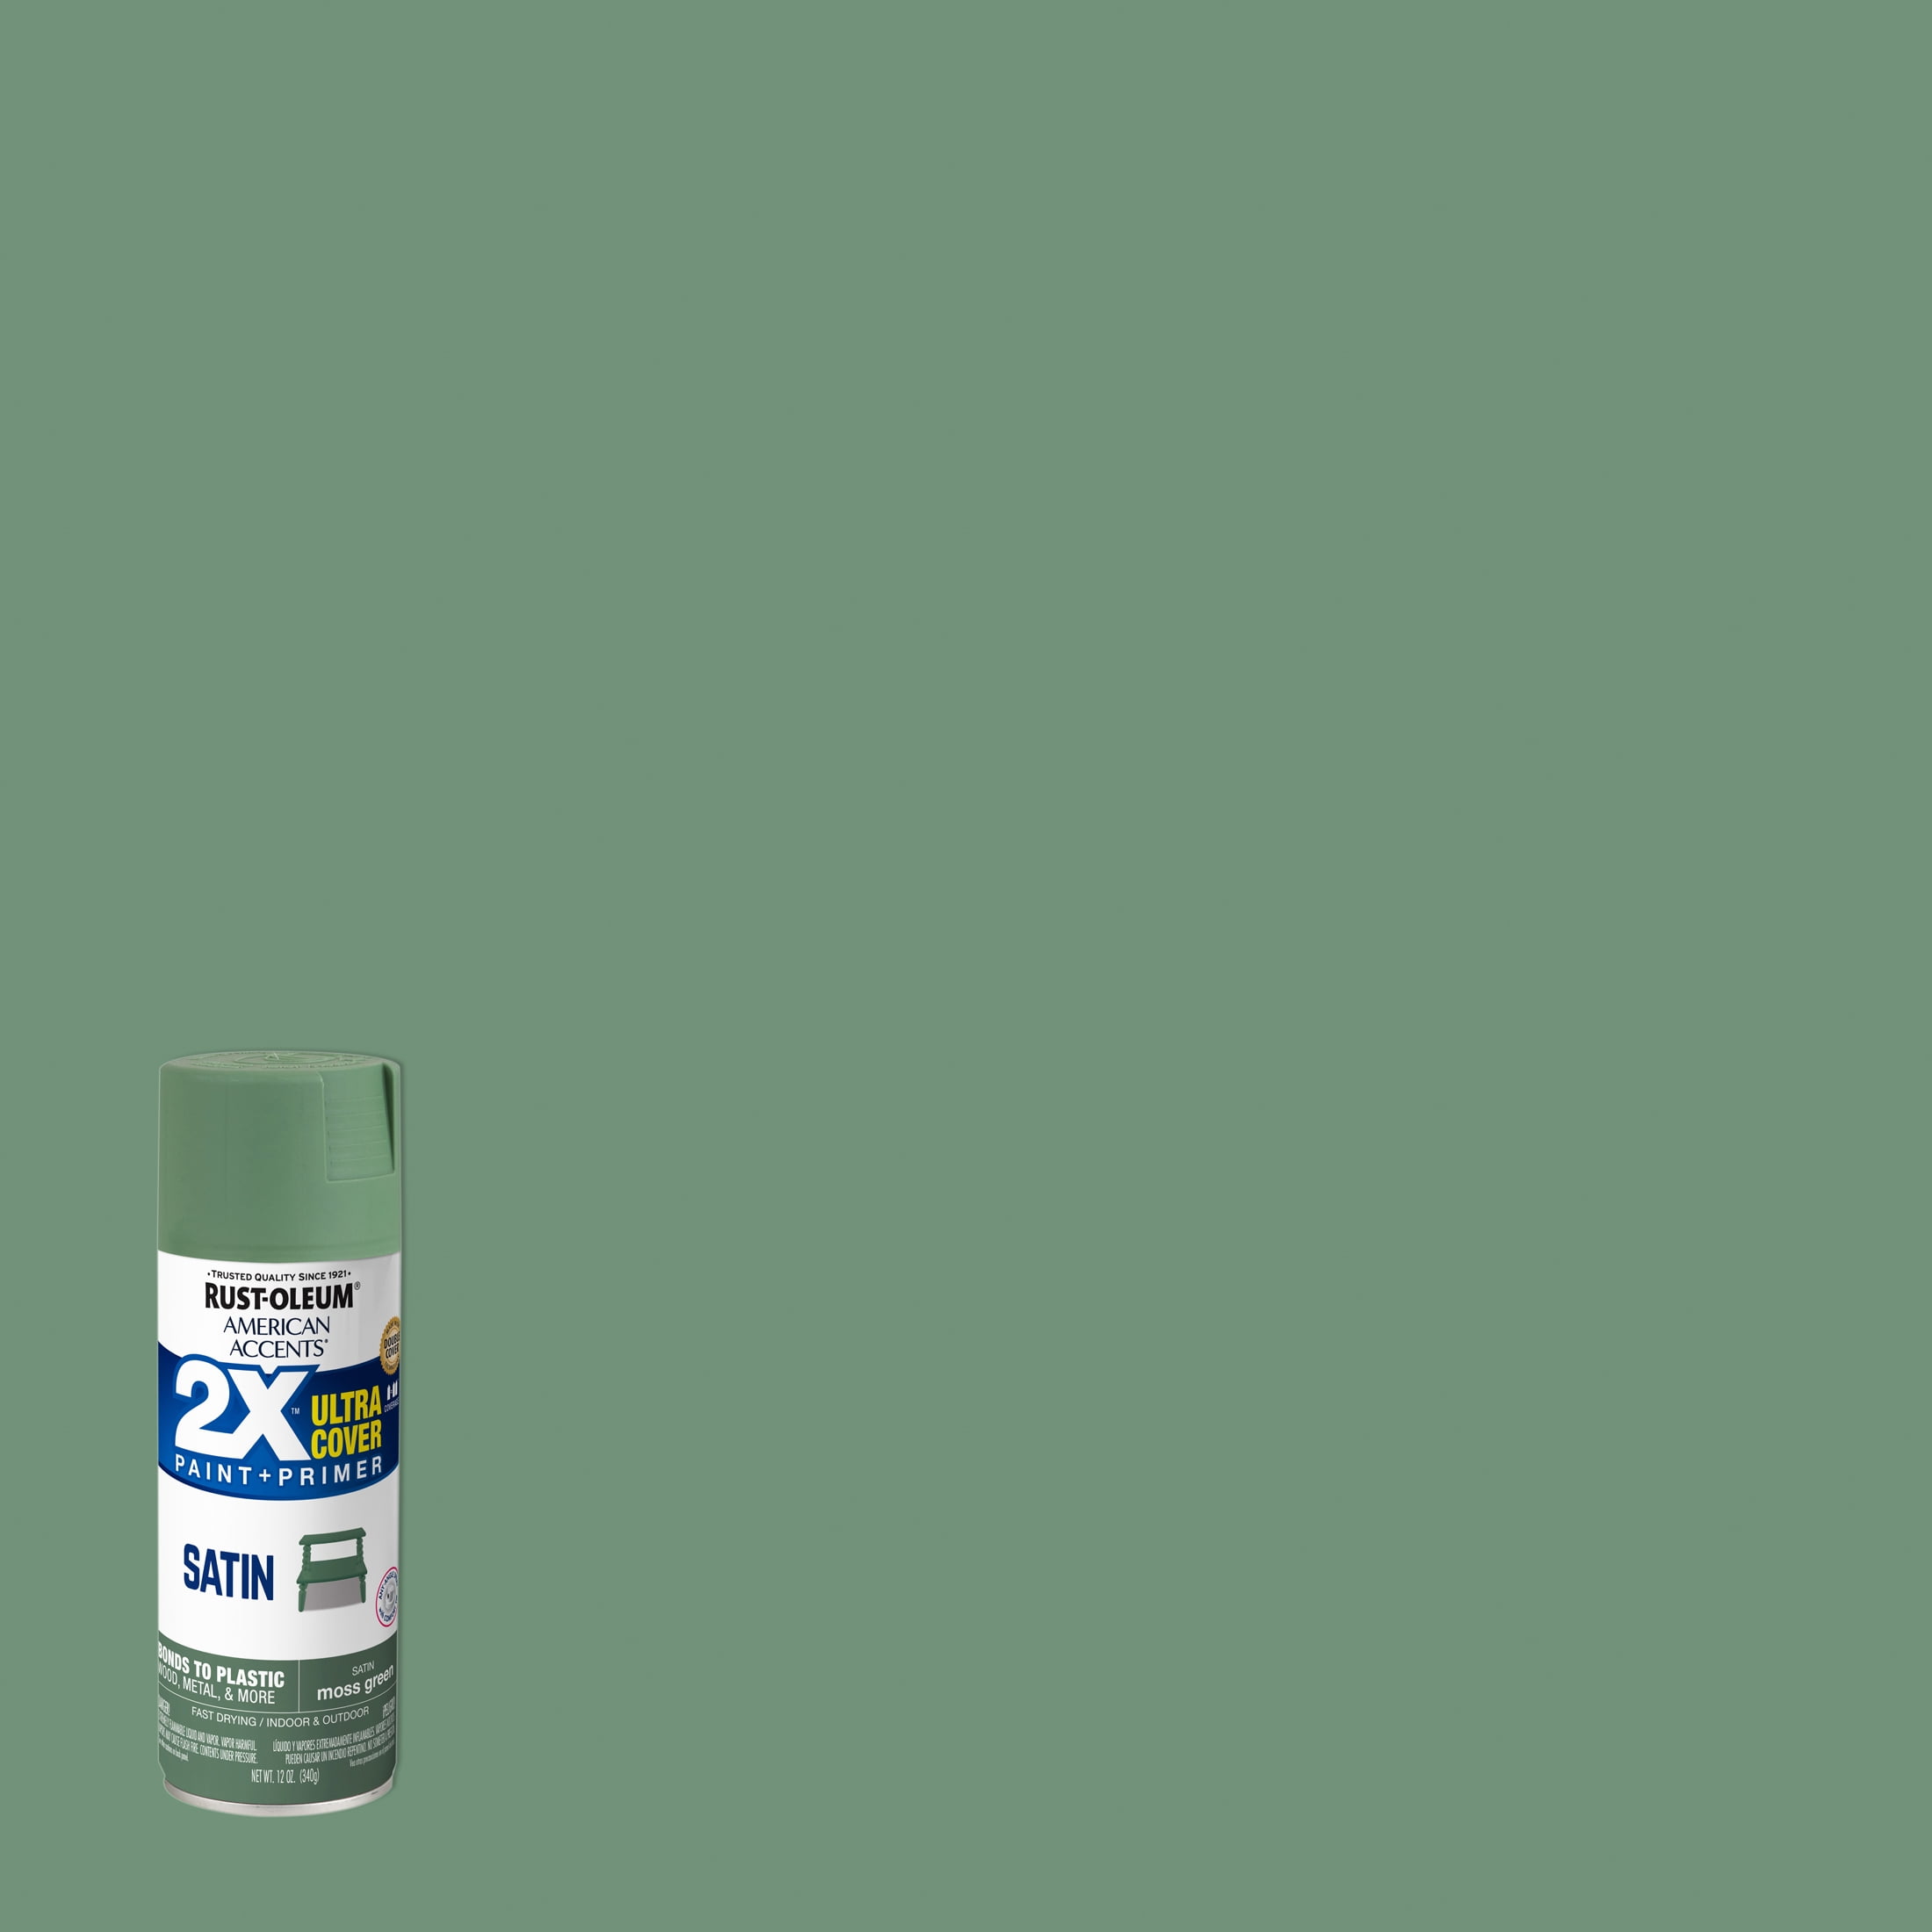 Rust-Oleum American Accents 2x Ultra Cover Satin Sray Paint 354729